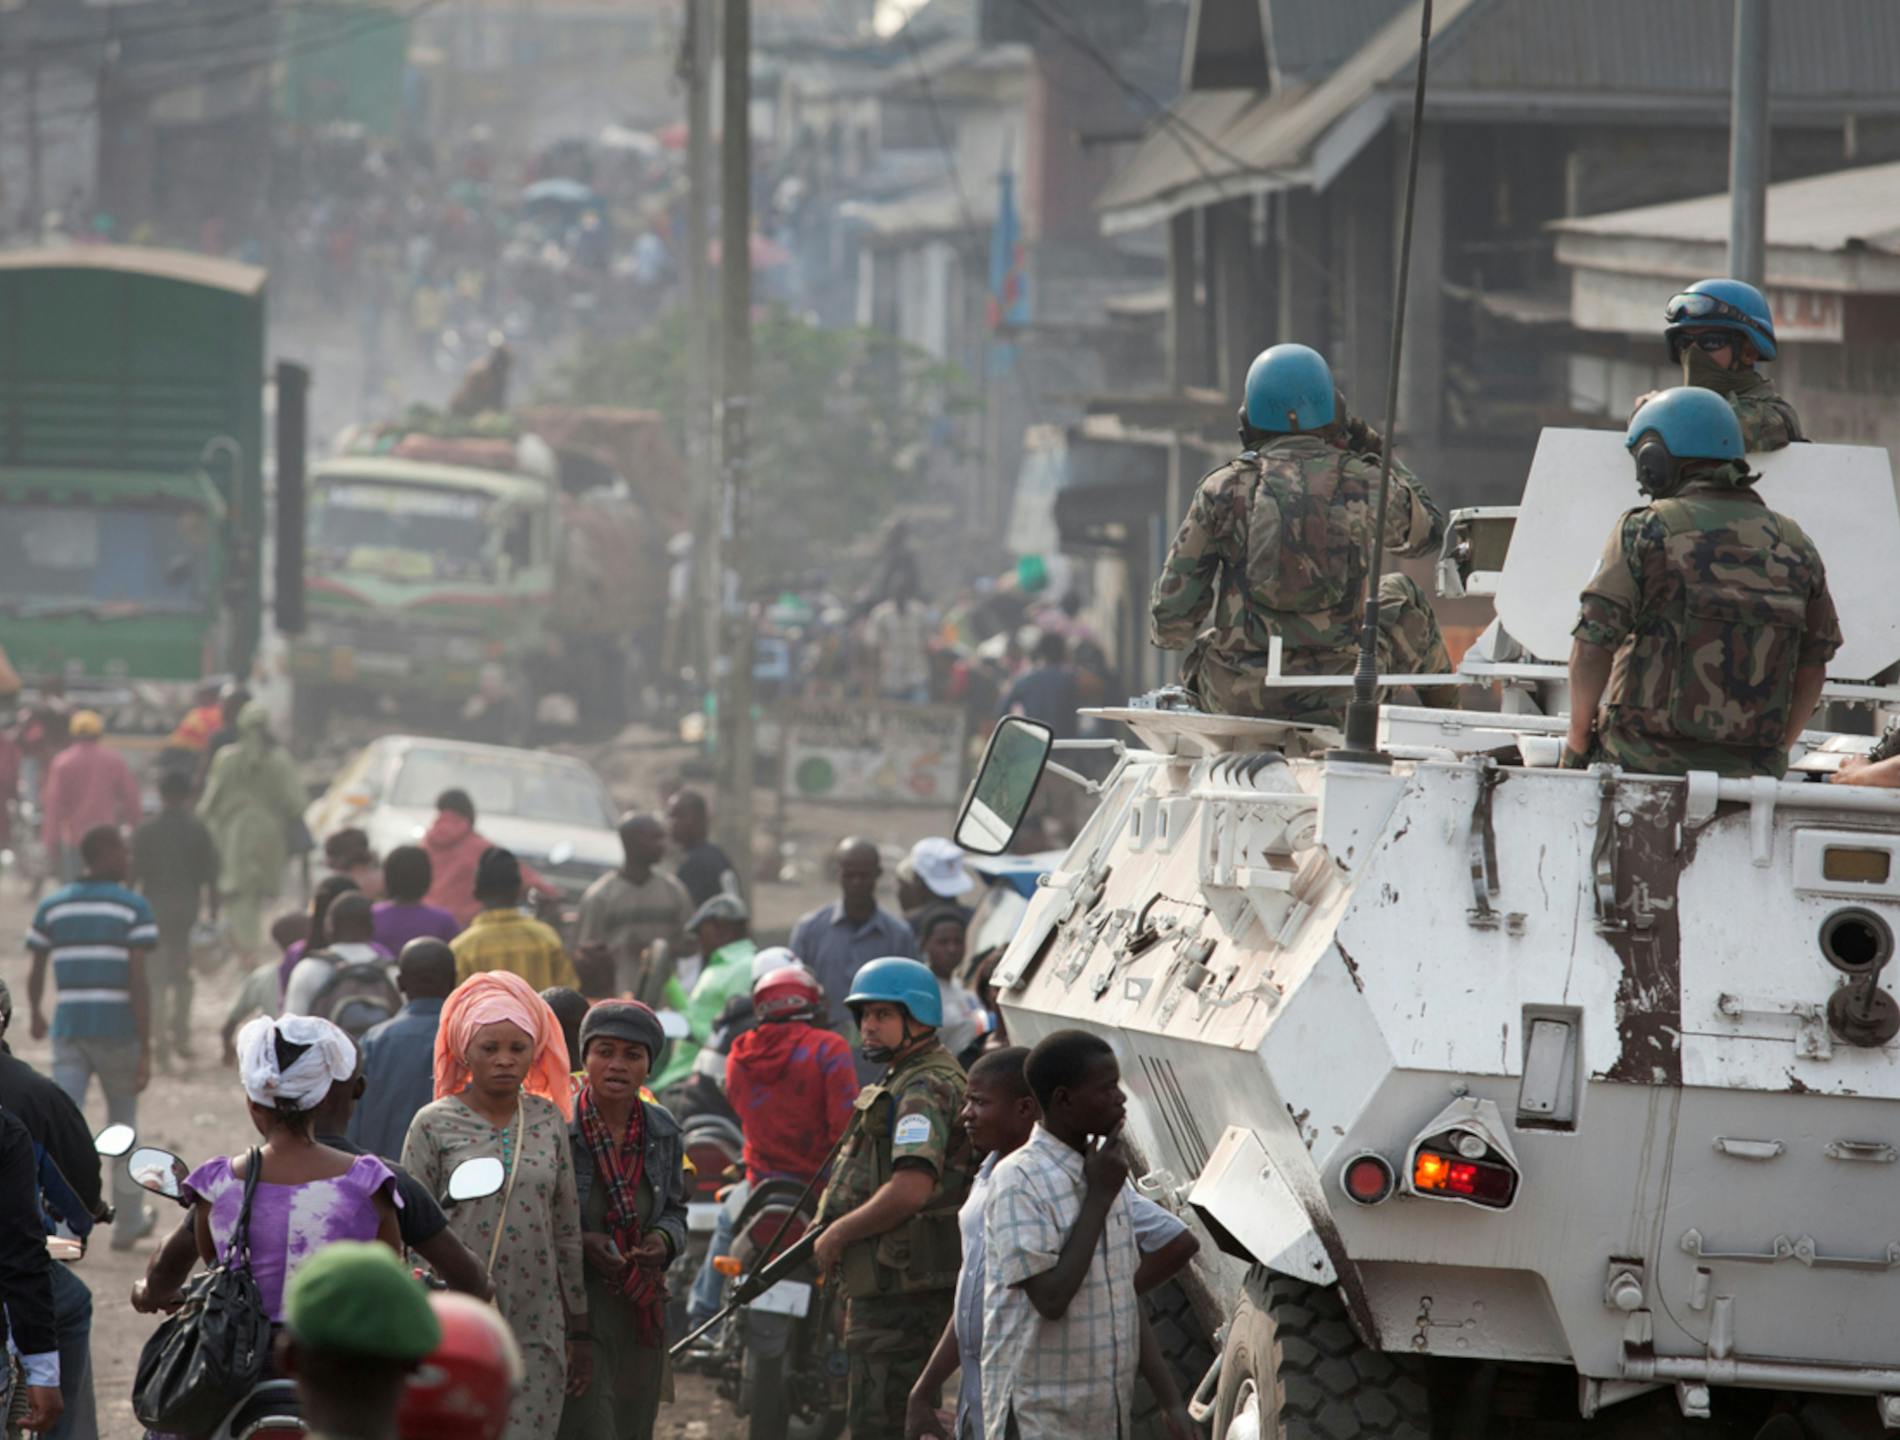 Soldiers patrolling a crowded street in the east of the Democratic Republic of Congo. Photo: MONUSCO/Sylvain Liechti